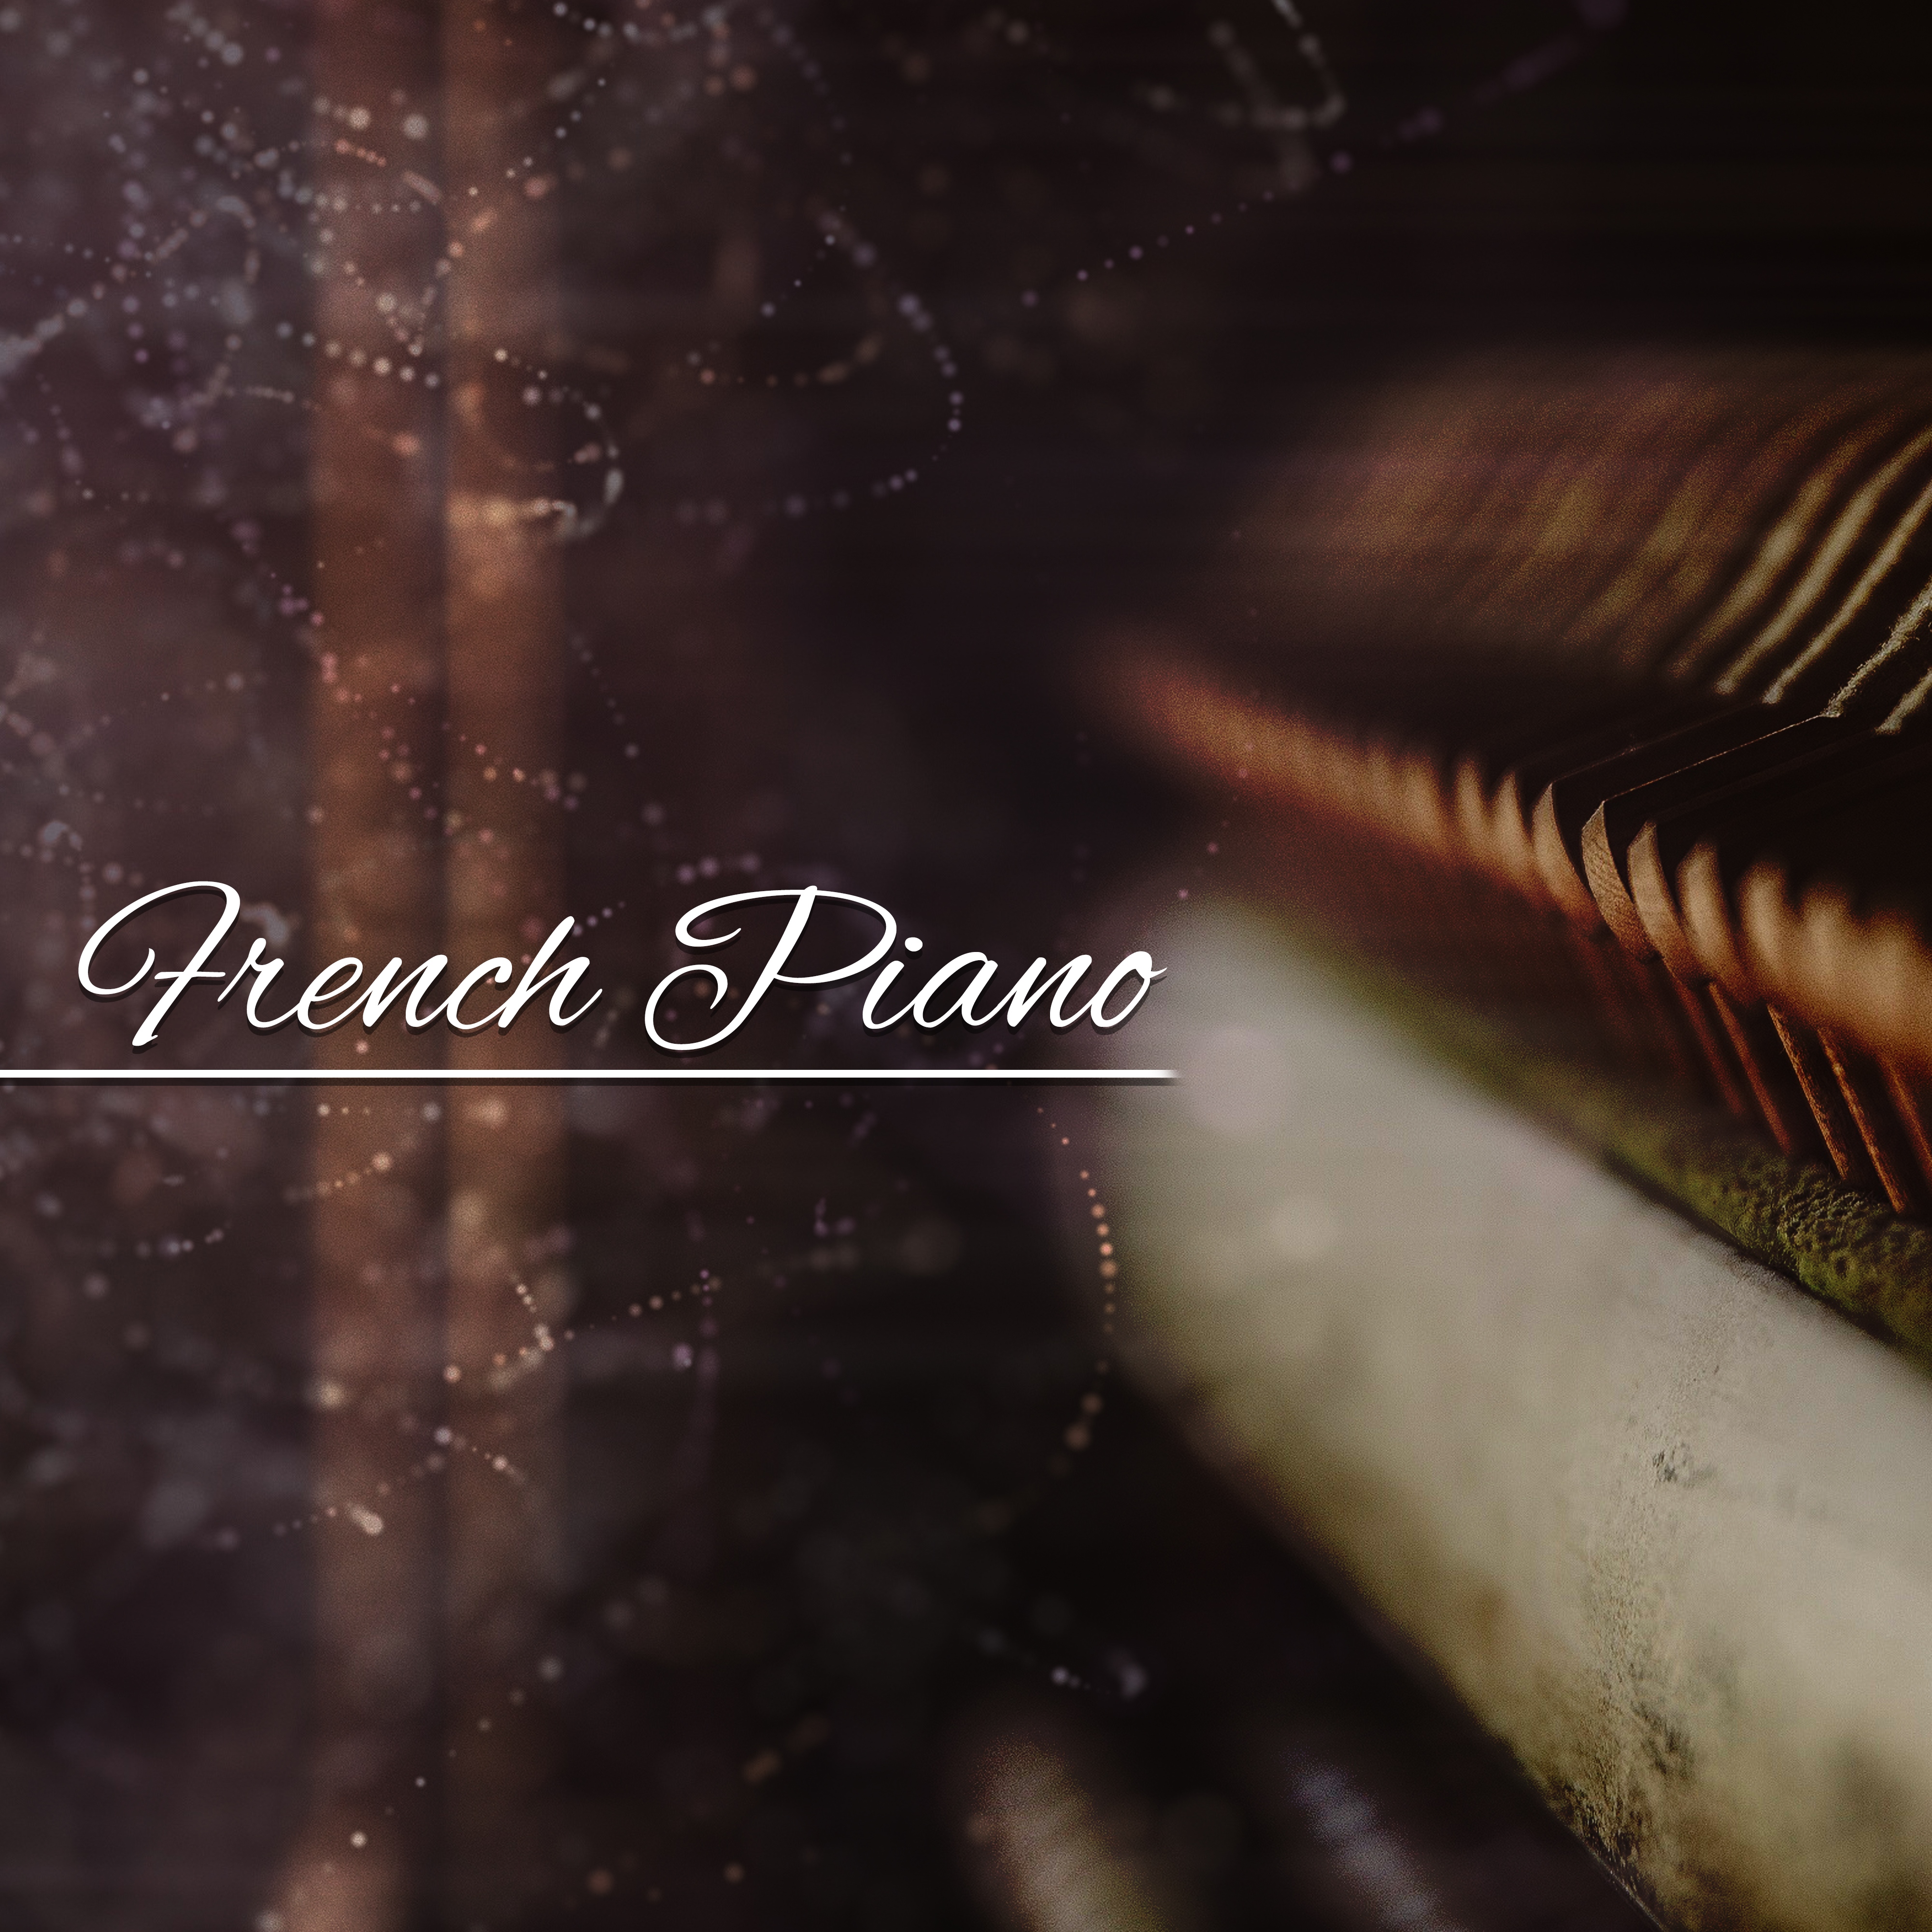 French Piano  Ambient Jazz Instrumental, Piano Music, Chilled Jazz Lounge, Relaxing Jazz